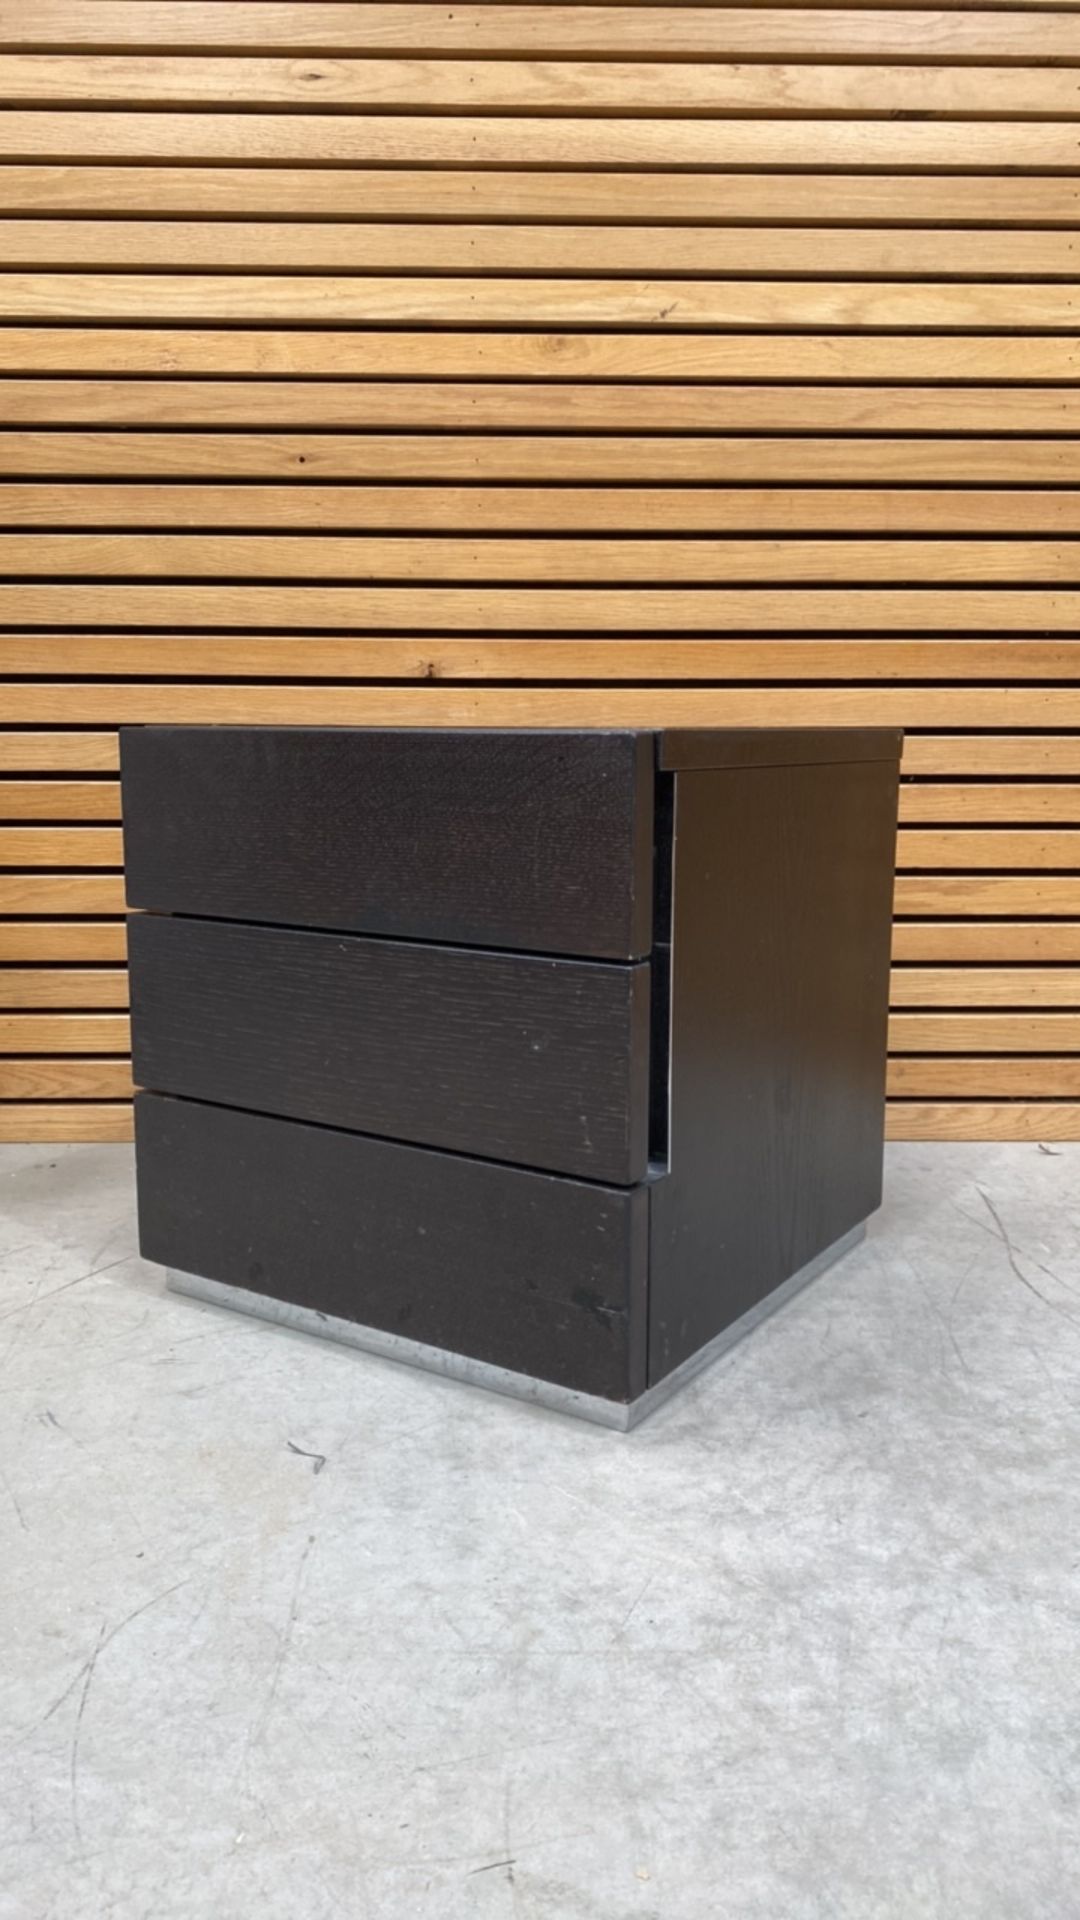 Black Wooden Cabinet With 2 Drawers - Image 4 of 4